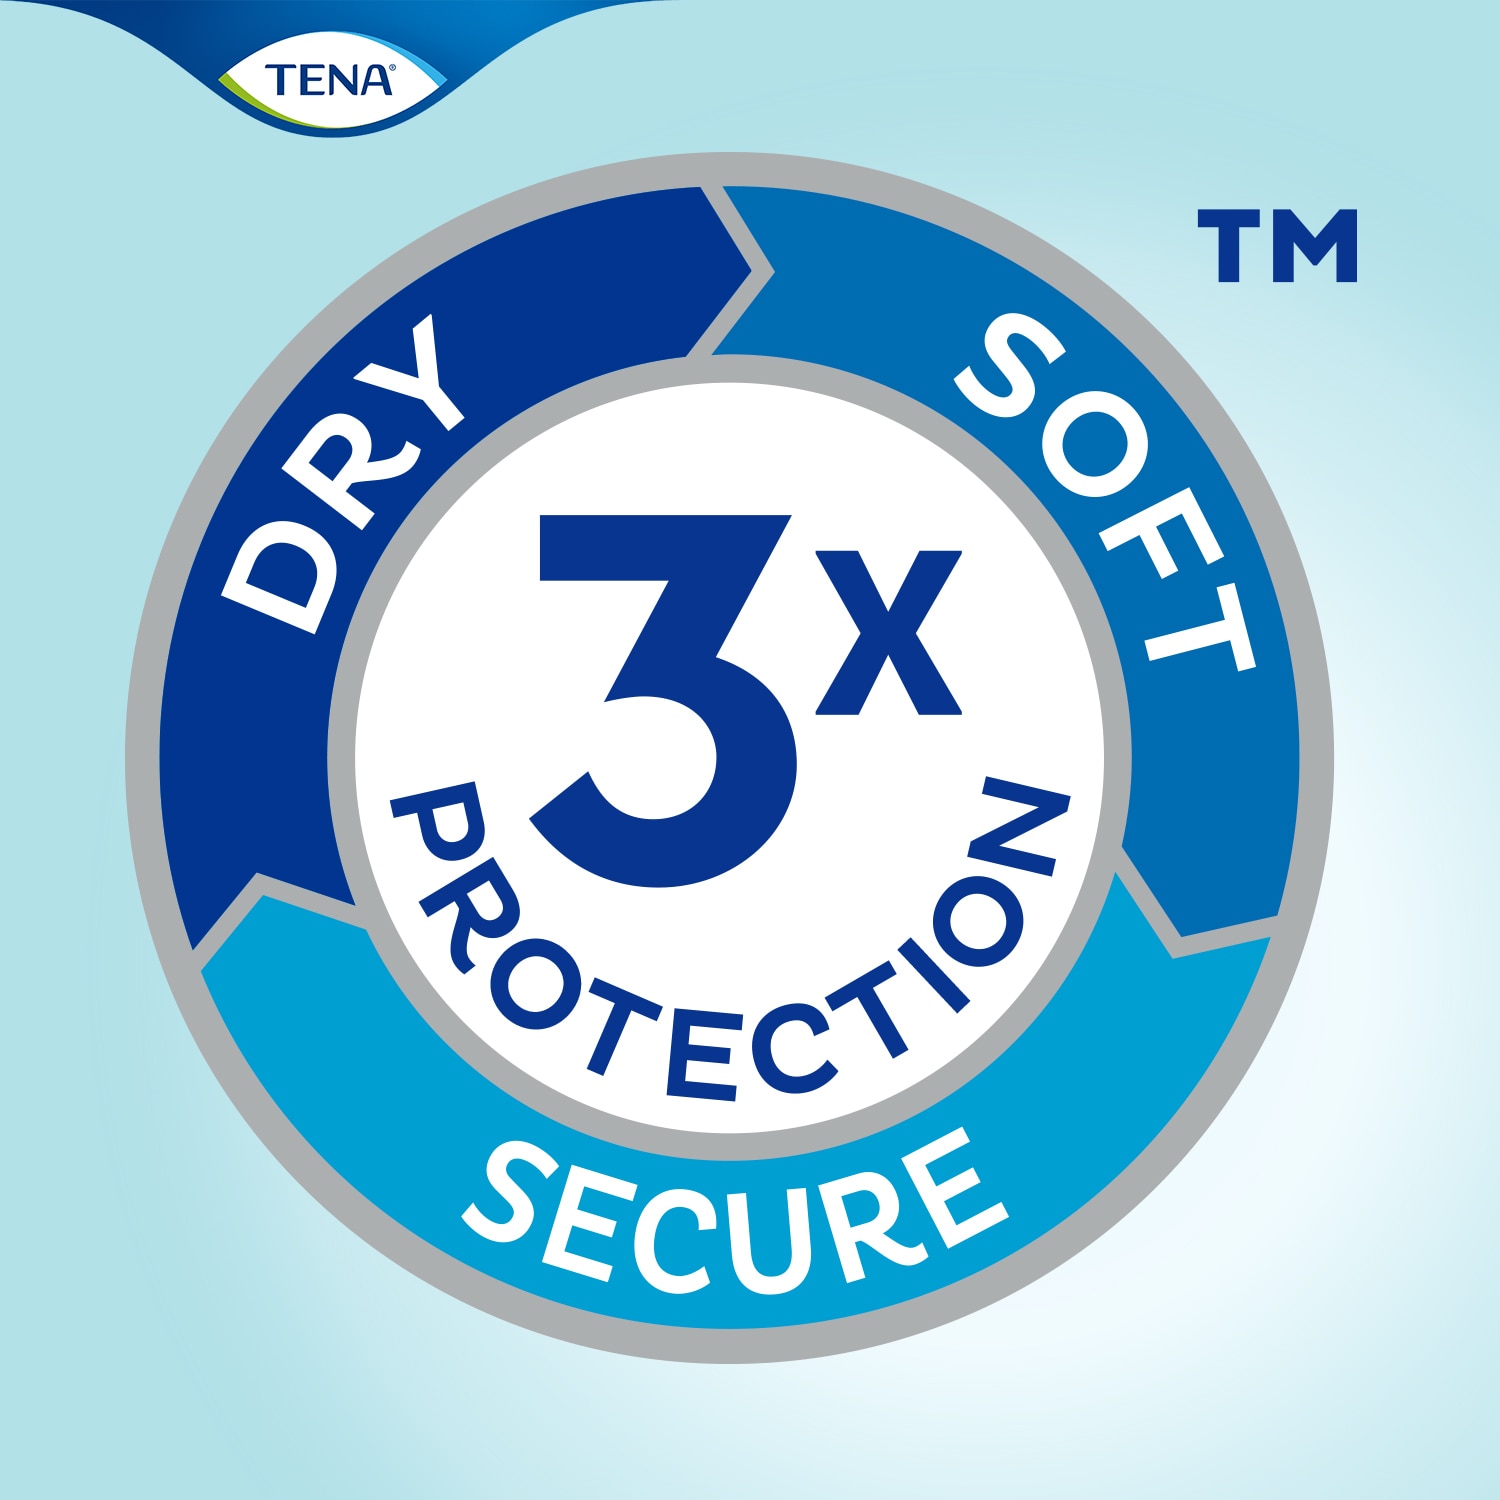 TENA ProSkin stay dry, soft and secure